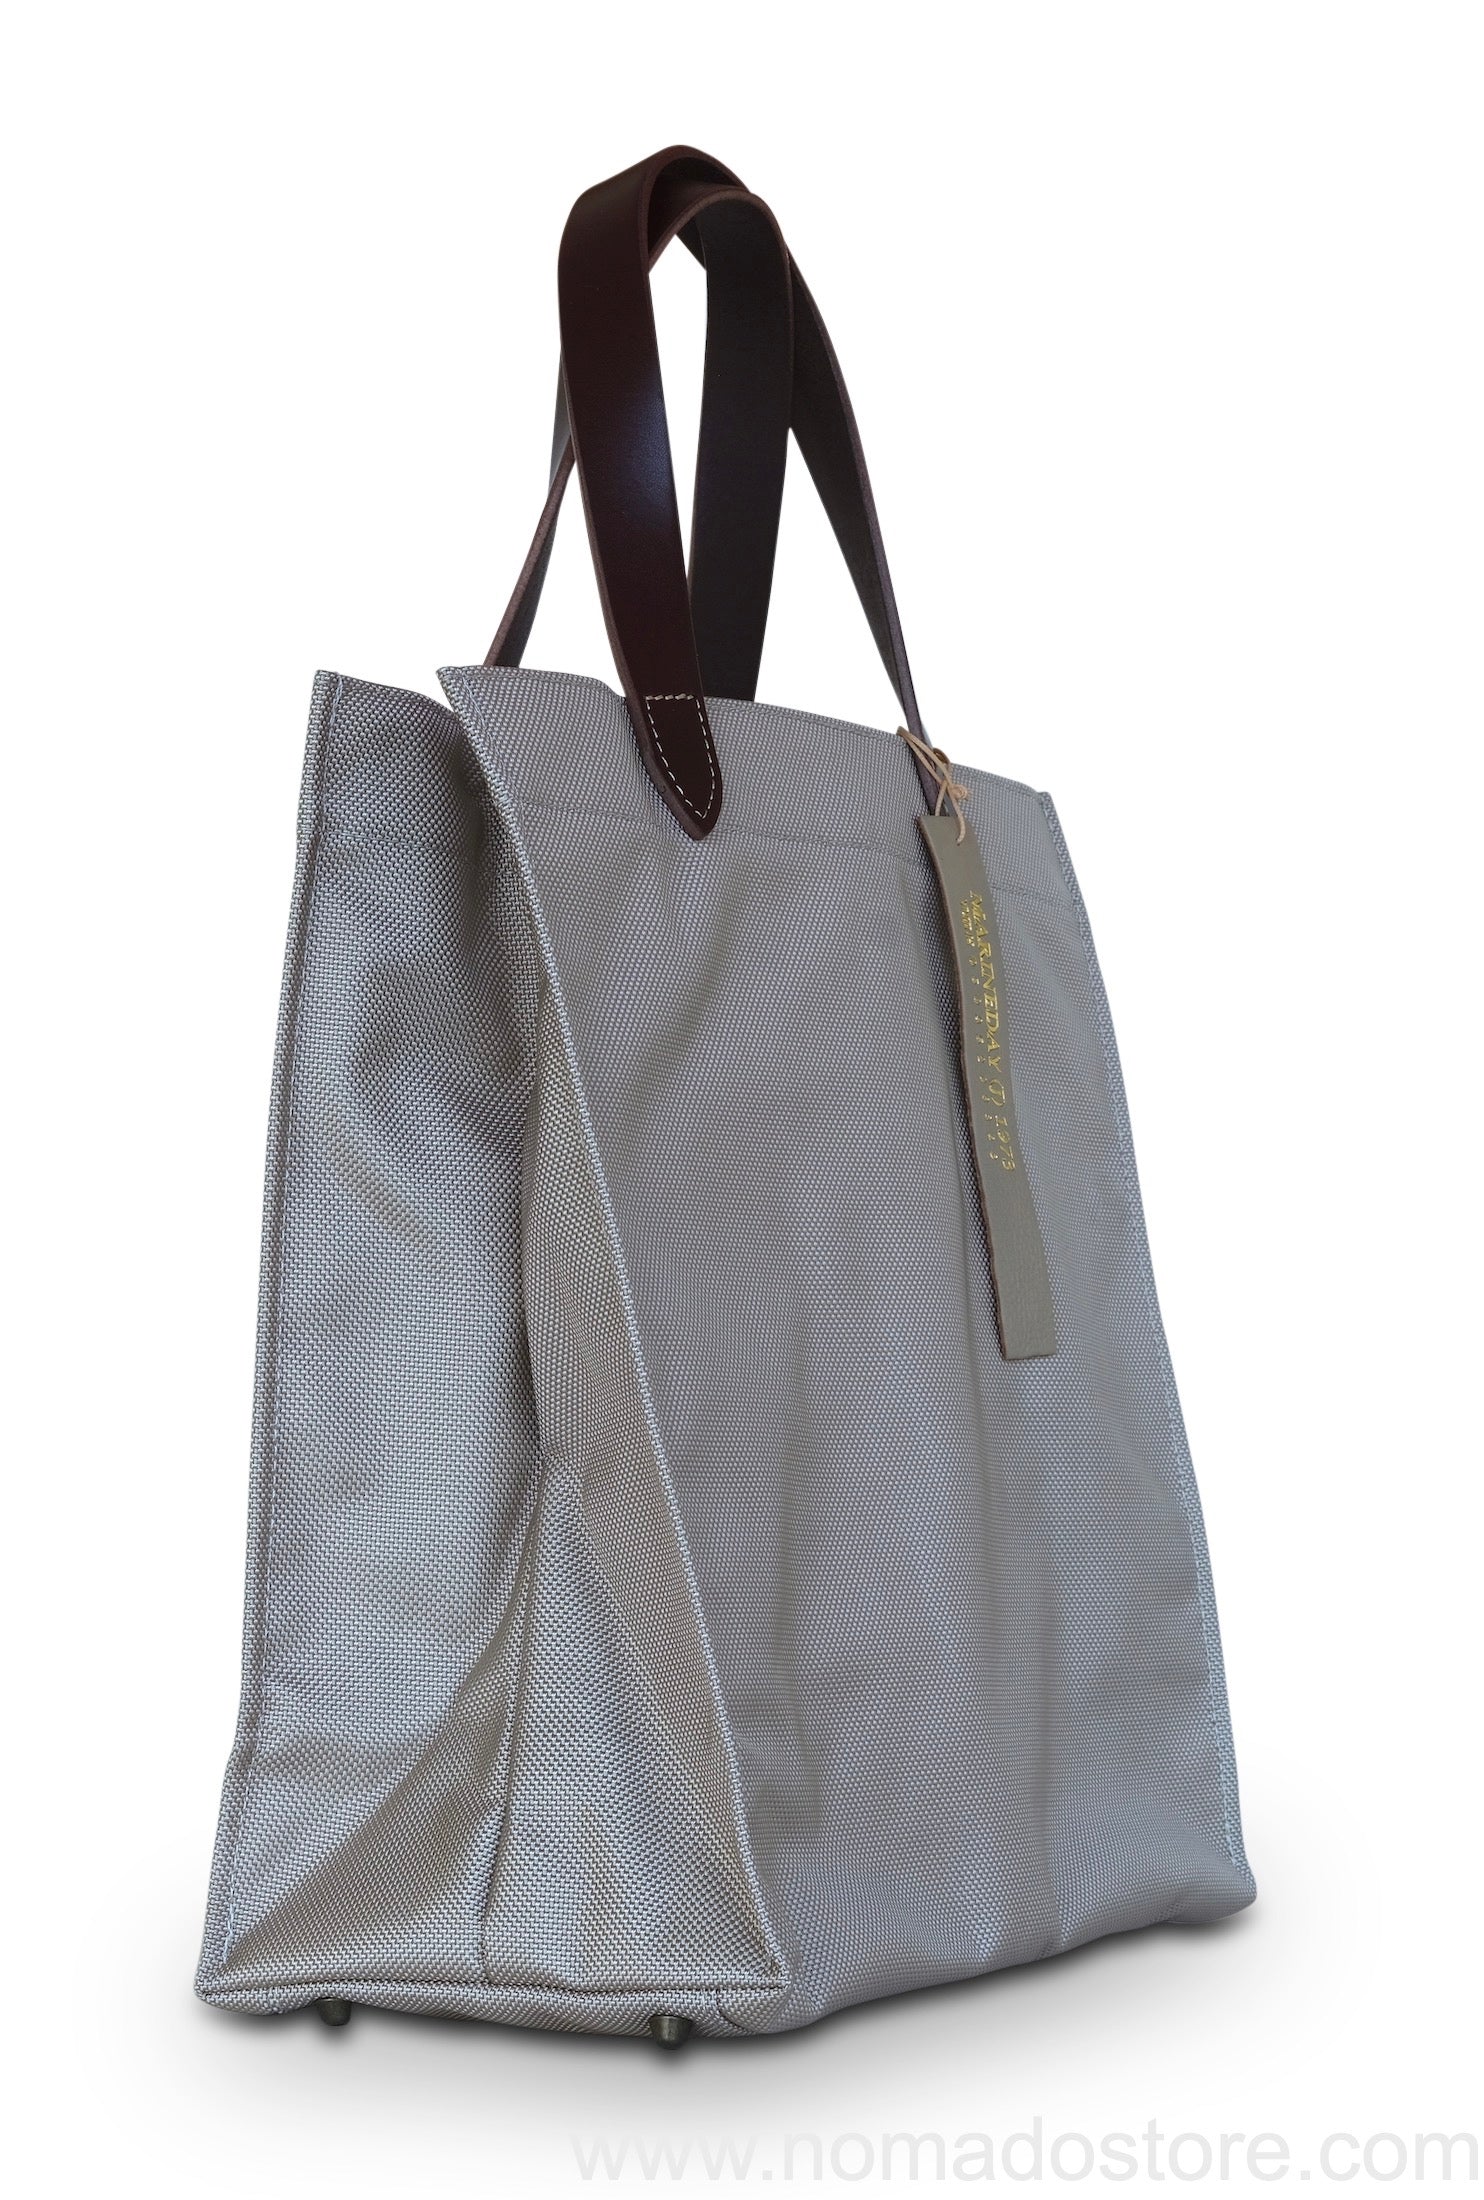 Tote Bag in Greige/Silver | Genuine Leather | Bandolier Style